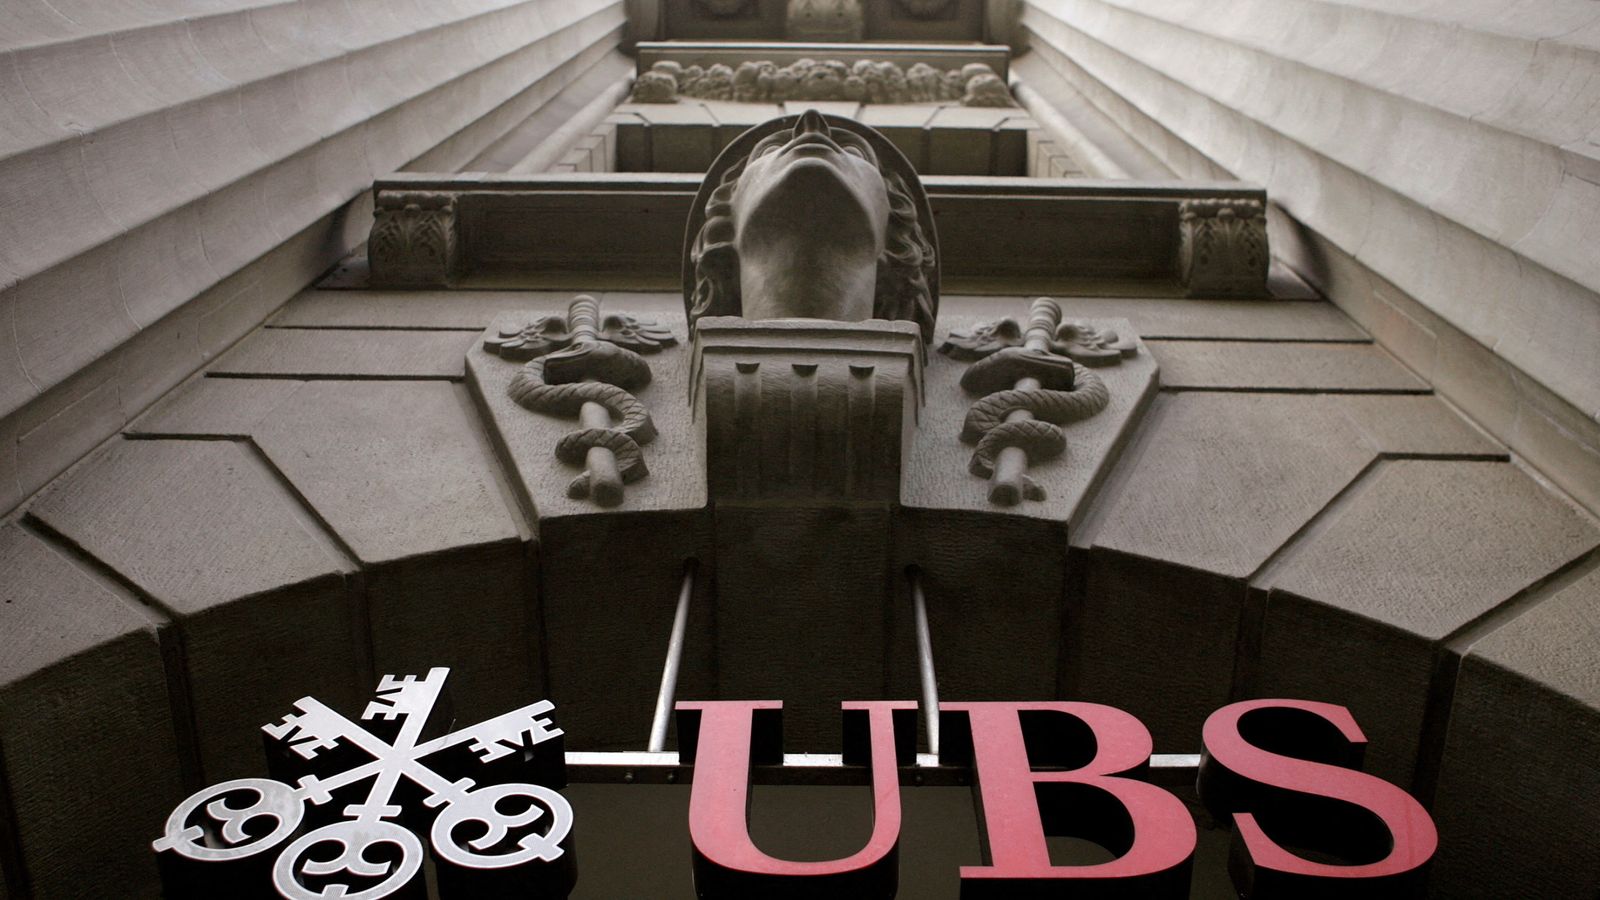 Ubs To Cut 3 000 Jobs In Switzerland Despite Huge Profits From Takeover Of Credit Suisse